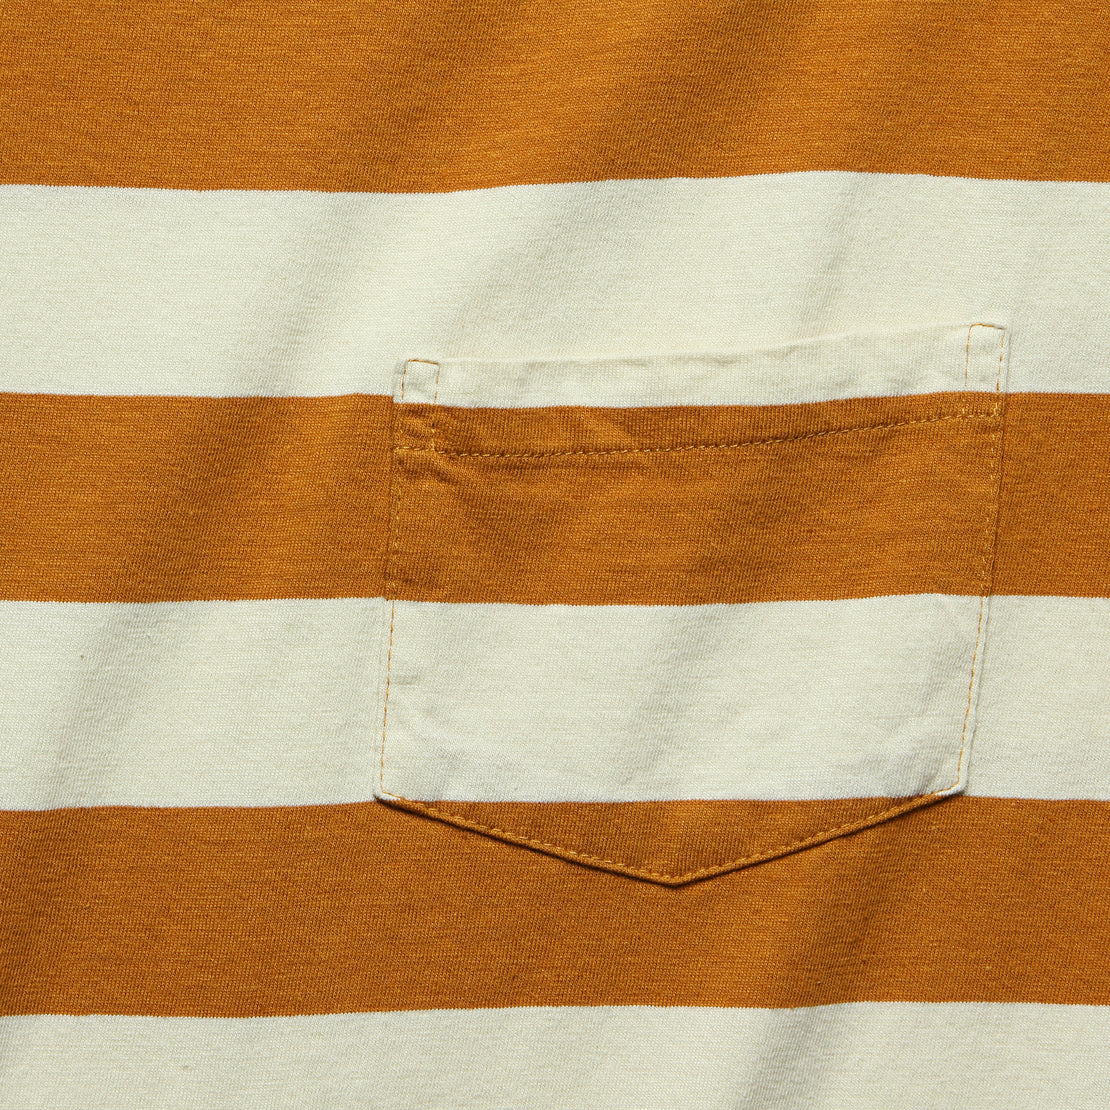 1950s Sportswear Tee - Thin Stripe Rust - Levis Vintage Clothing - STAG Provisions - Tops - S/S Tee